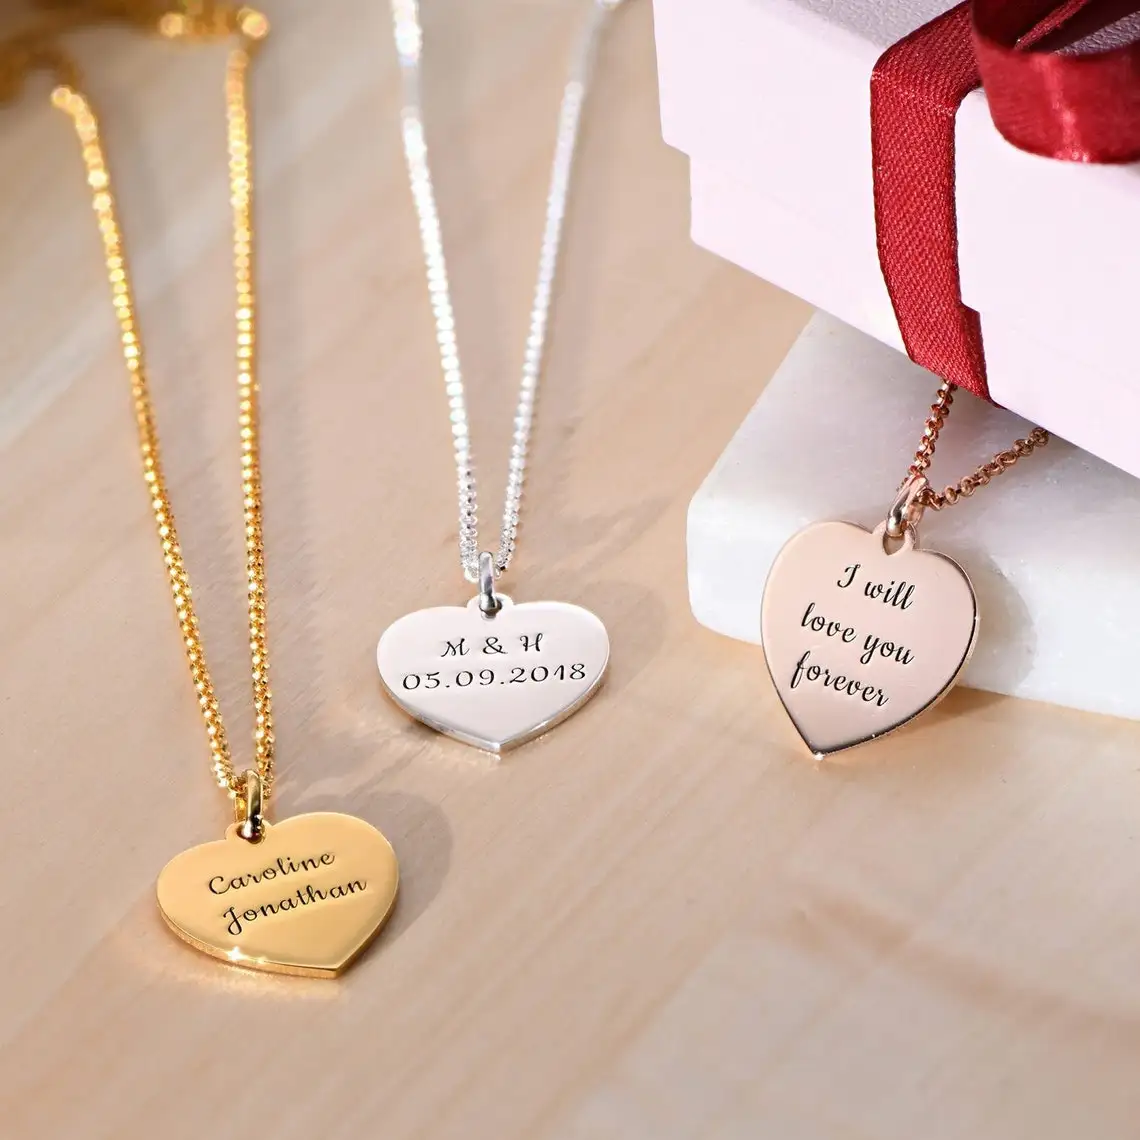 Custom Engraved Gold Women's Heart Pendant Necklace Personalized Jewelry Customized Christmas Gift for Her Friend Mom Girlfriend